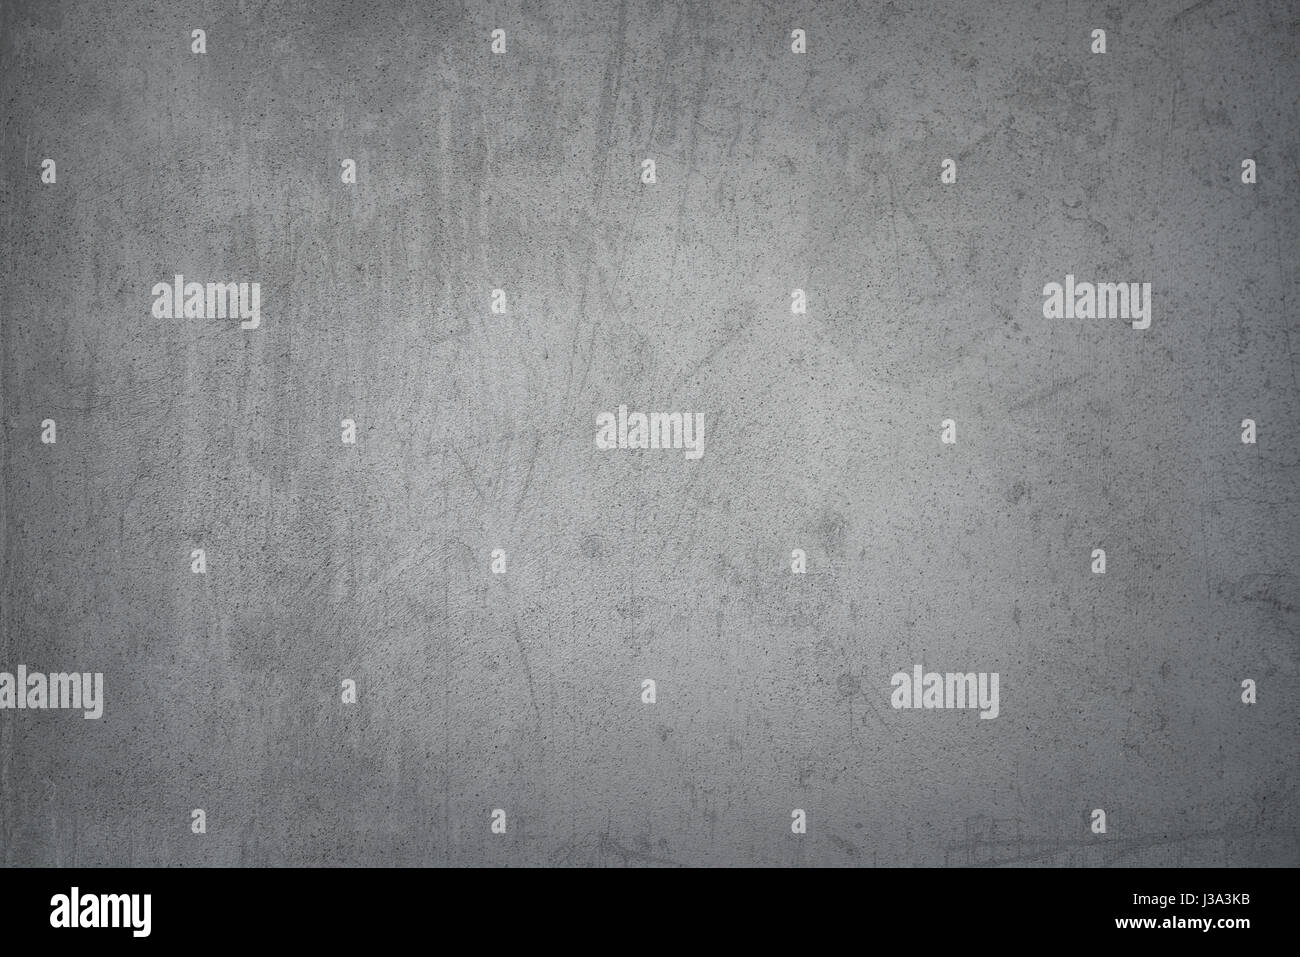 Grey grunge textured wall. Copy space Stock Photo